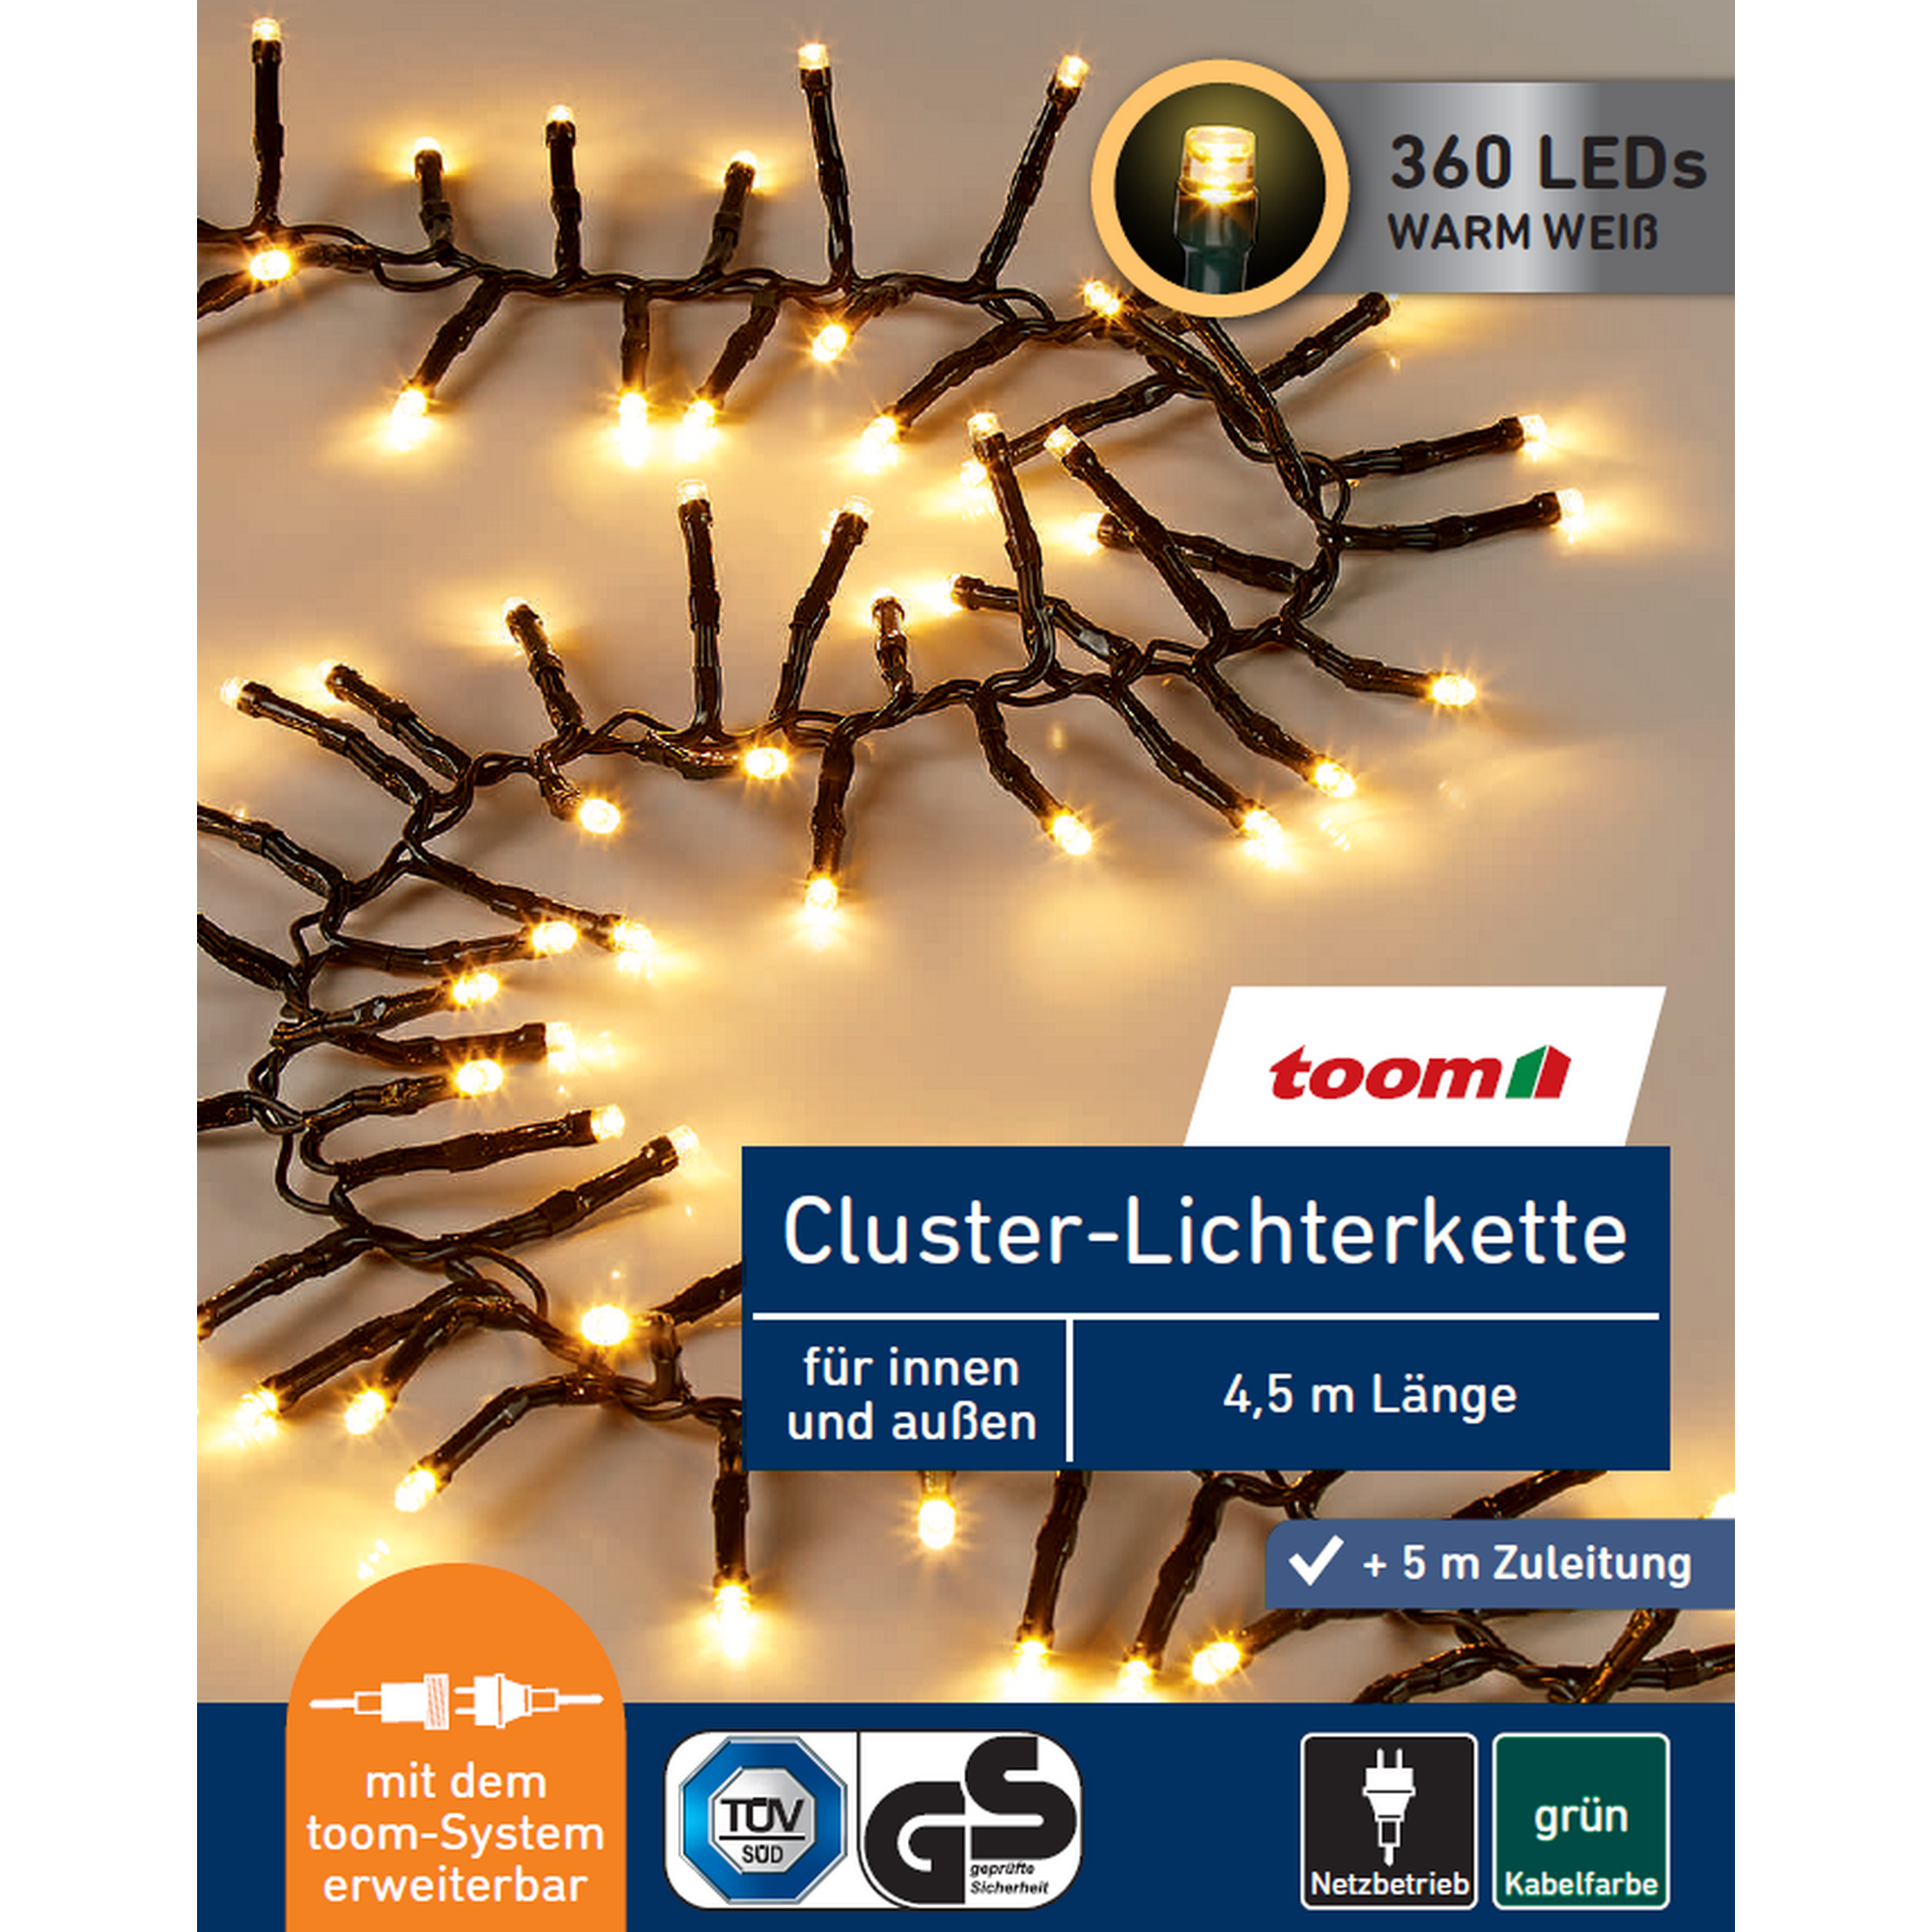 LED-Cluster-Lichterkette 360 LEDs warmweiß 450 cm + product picture